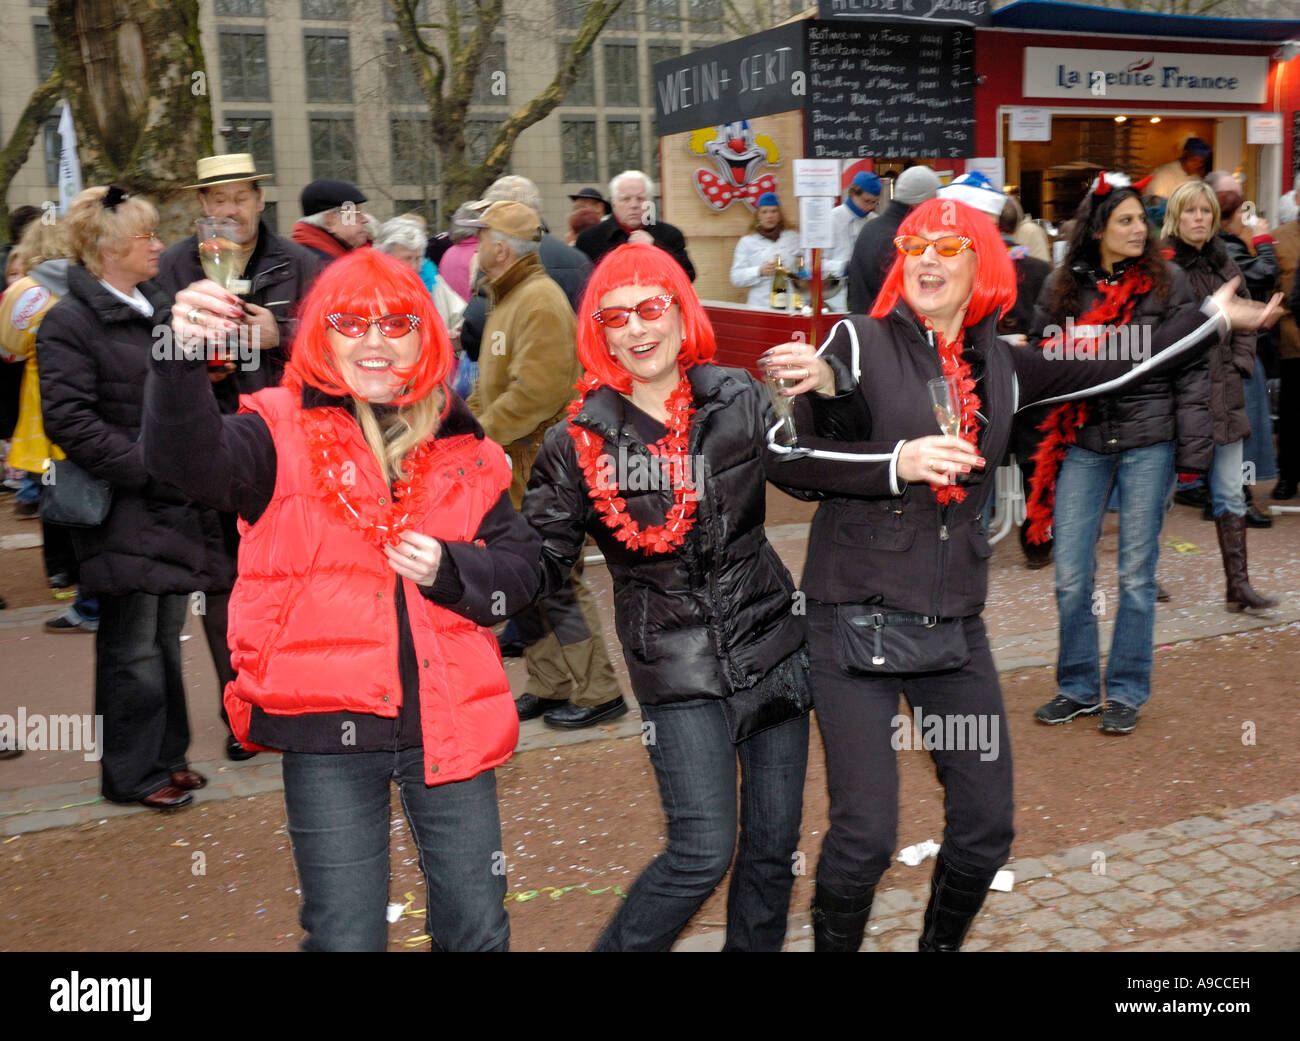 Dusseldorf carnival 2007. Three women with red wigs having a laugh. Stock Photo